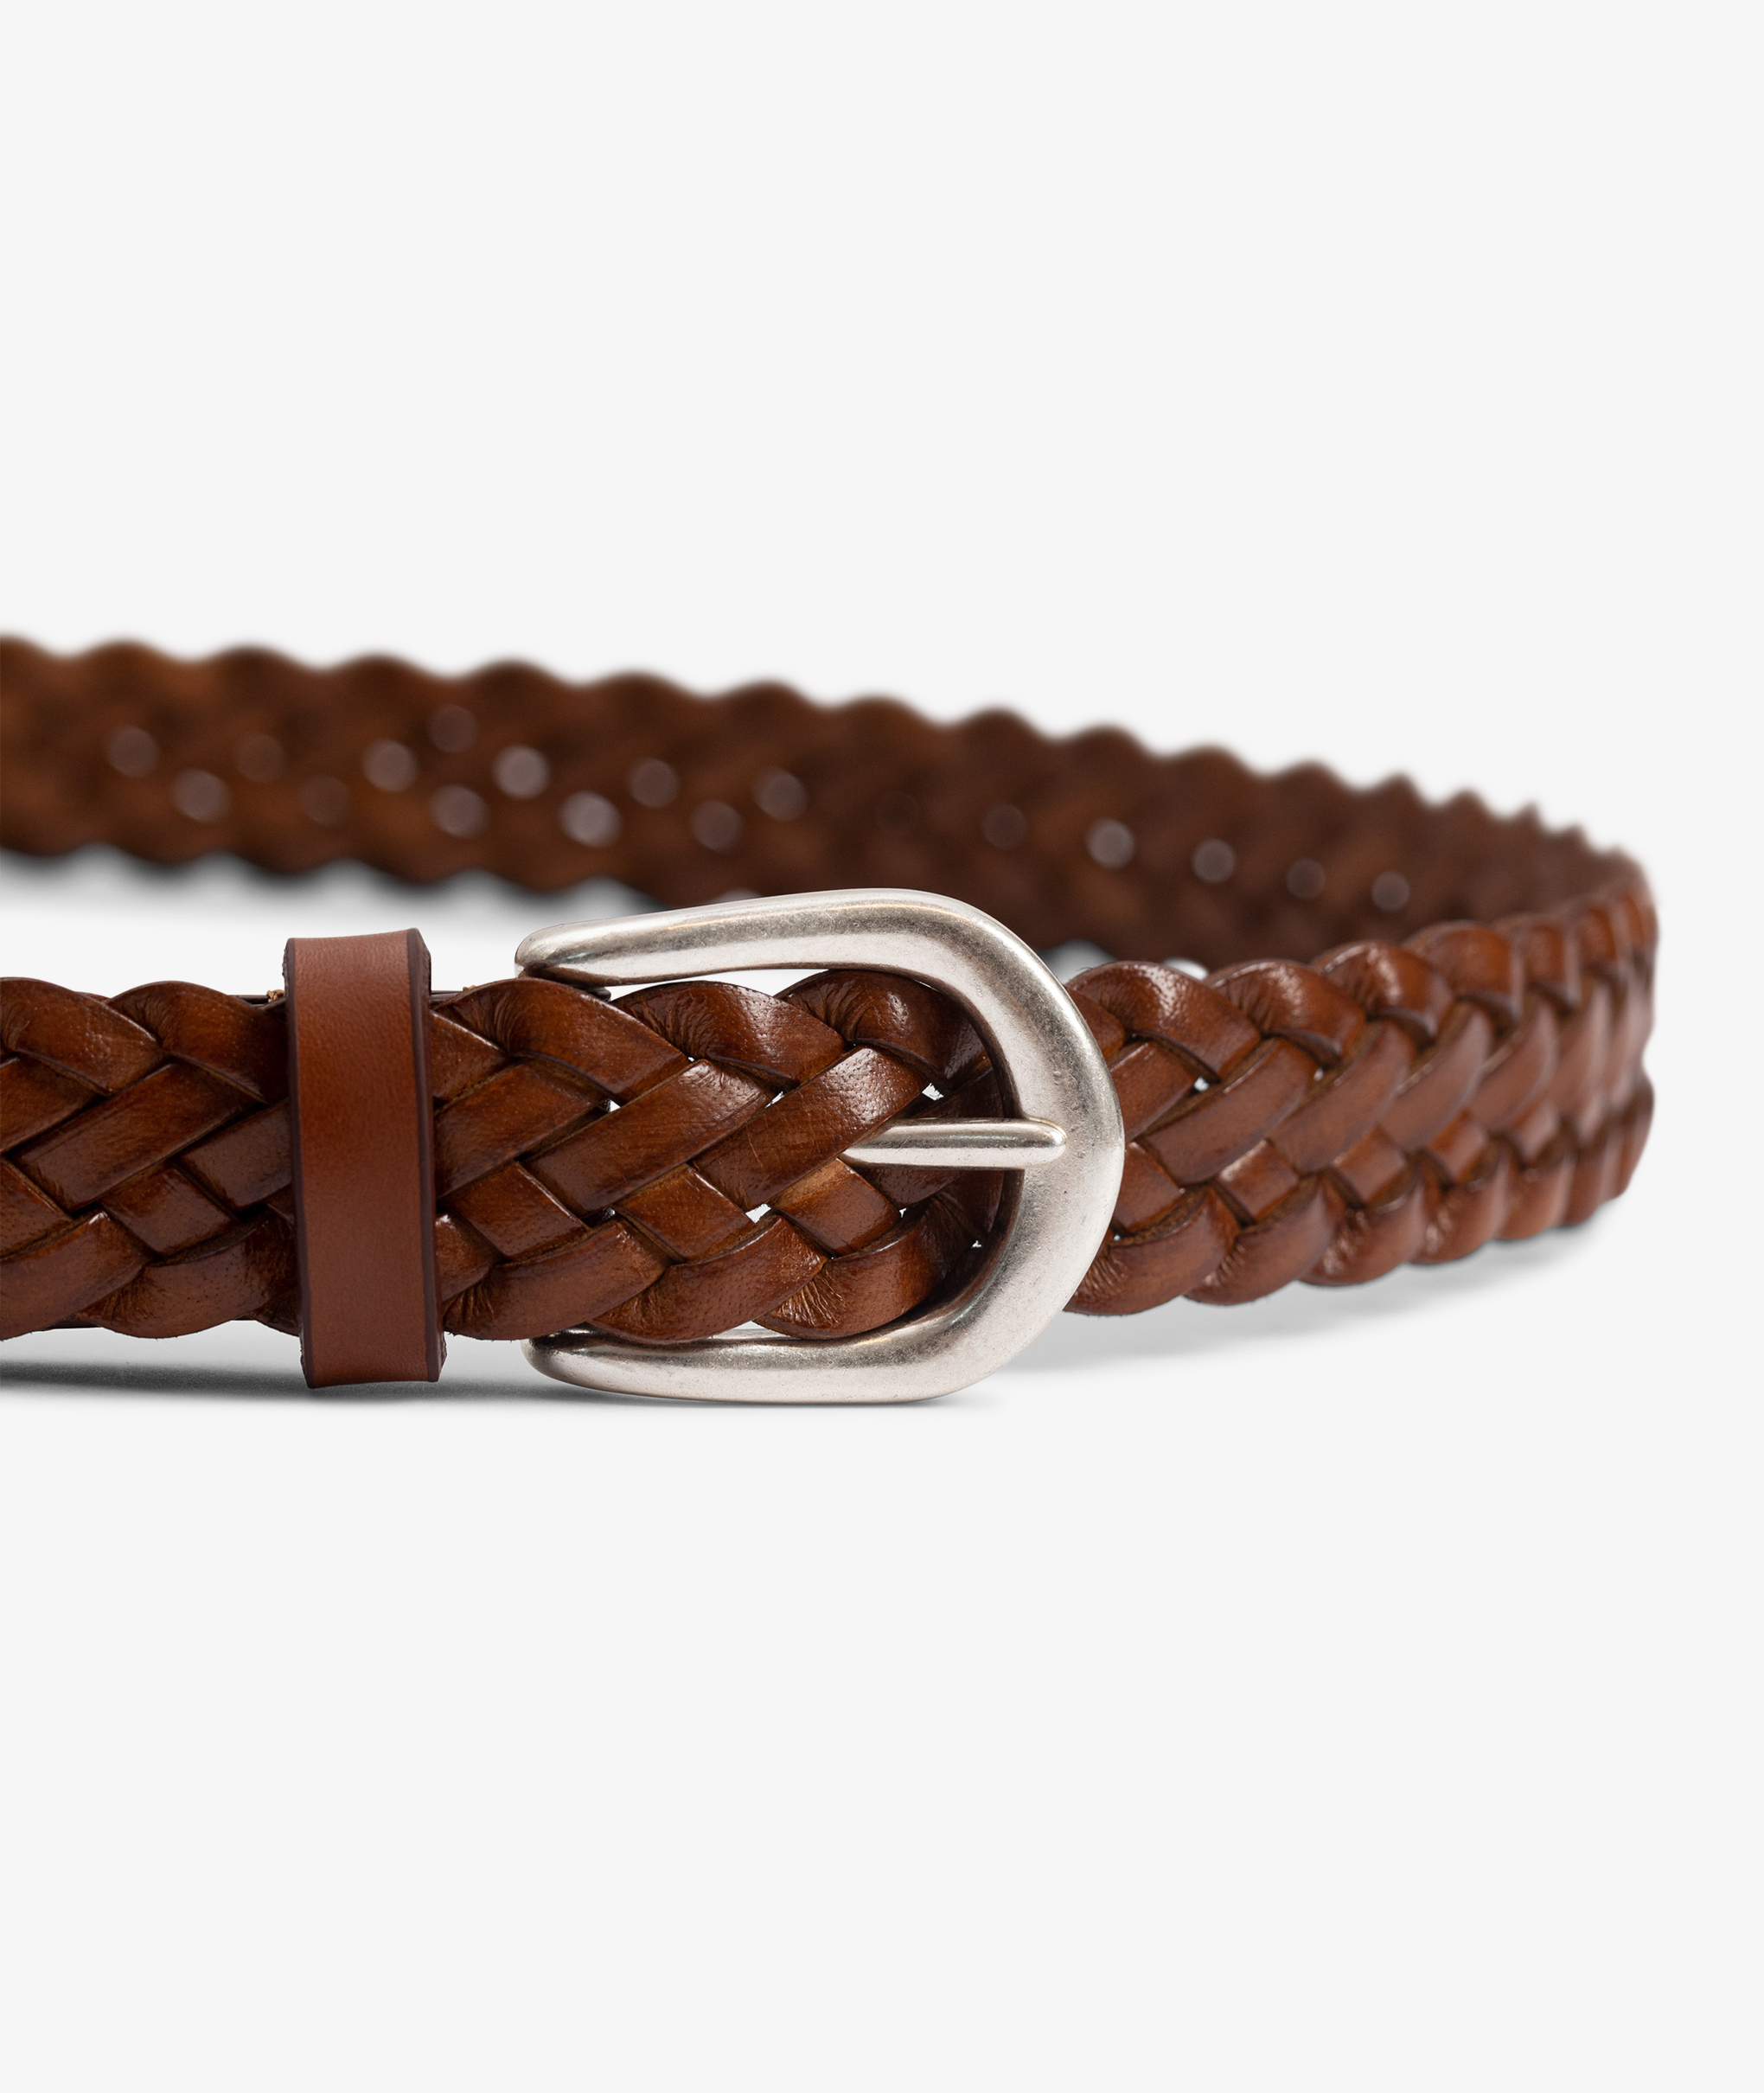 Braided belt in light brown leather